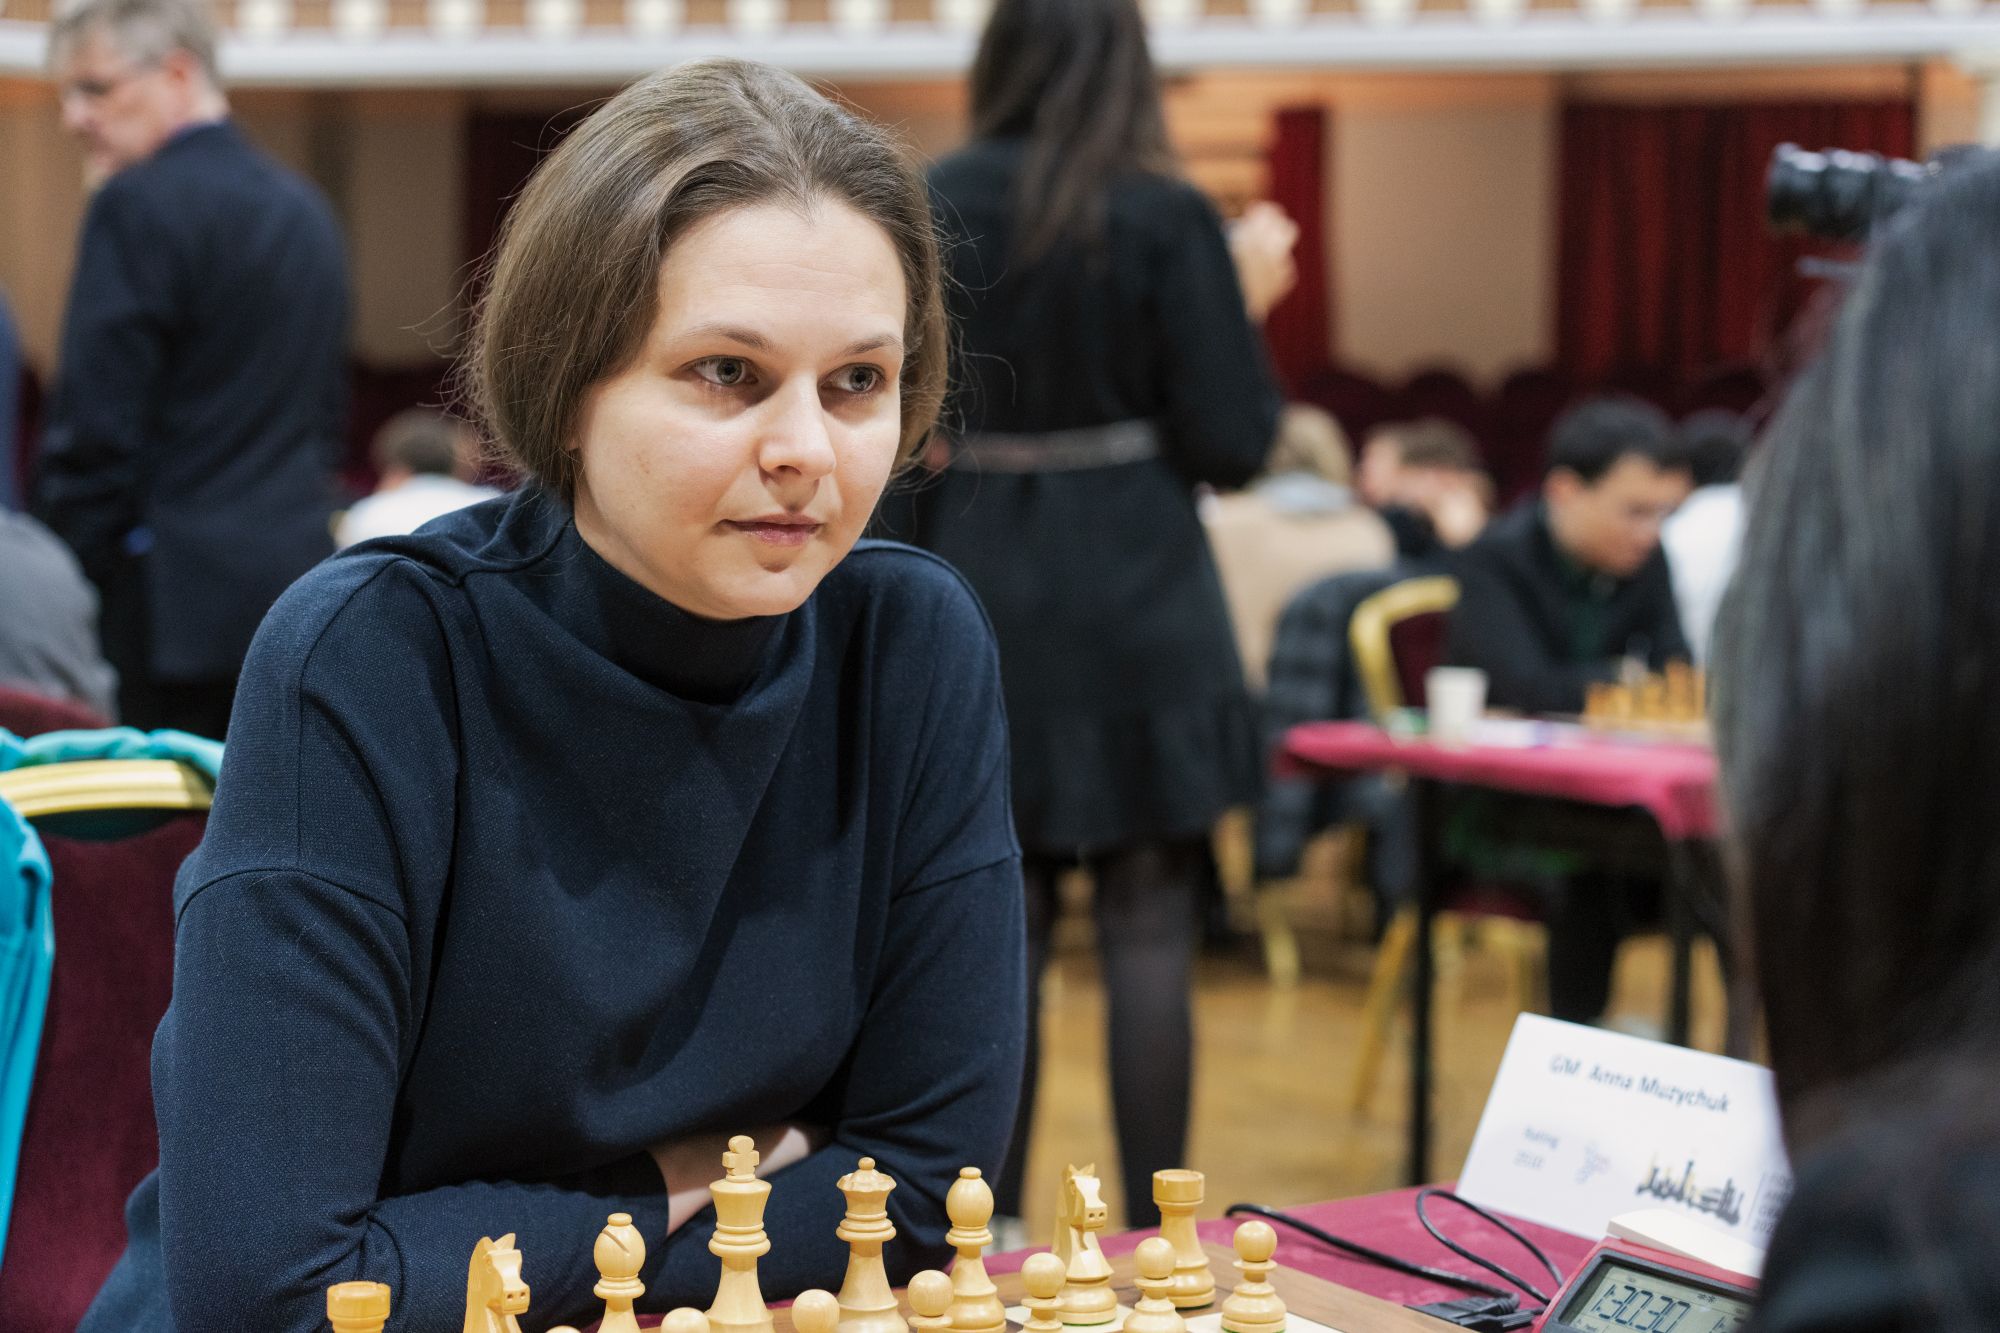 Chess players withdraw from Grand Swiss amid Latvia Covid-19 lockdown